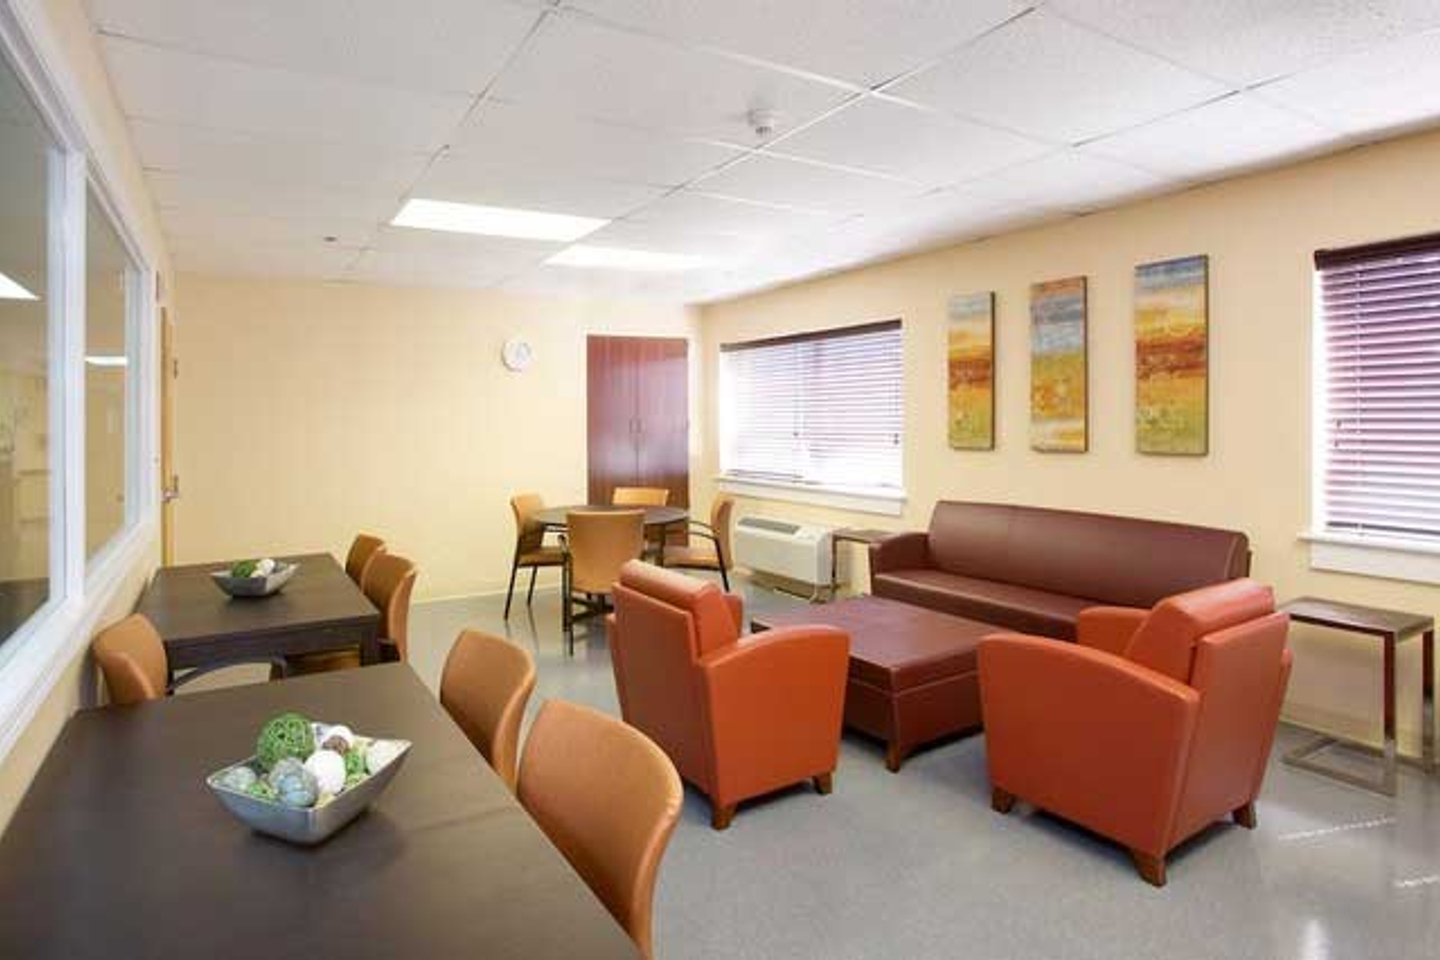 The lounge area at Reflections Eating Disorder Treatment Center